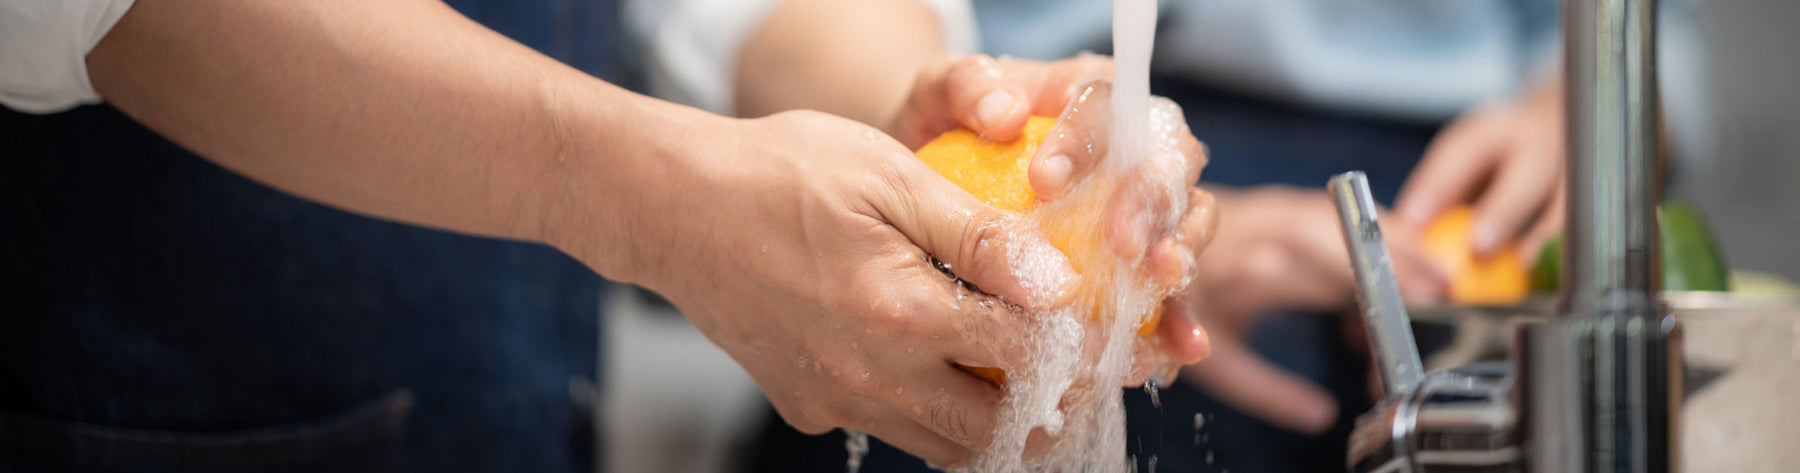 A person washing a yellow pepper under a sink